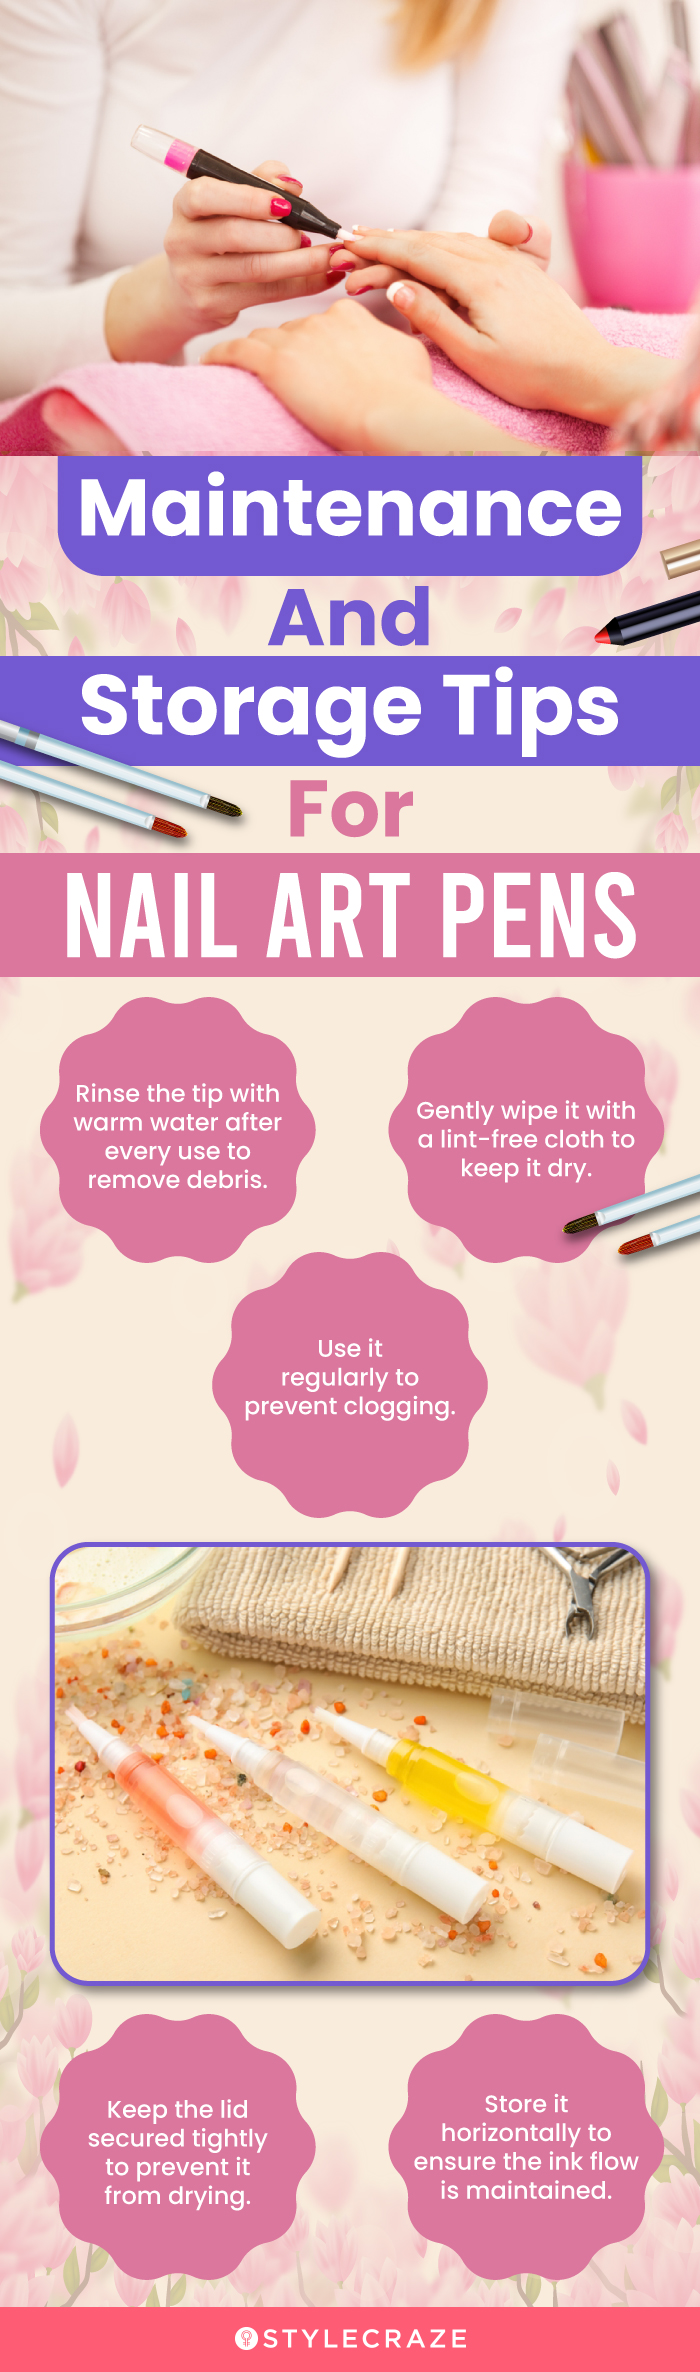 Maintenance And Storage Tips For Nail Art Pens (infographic)